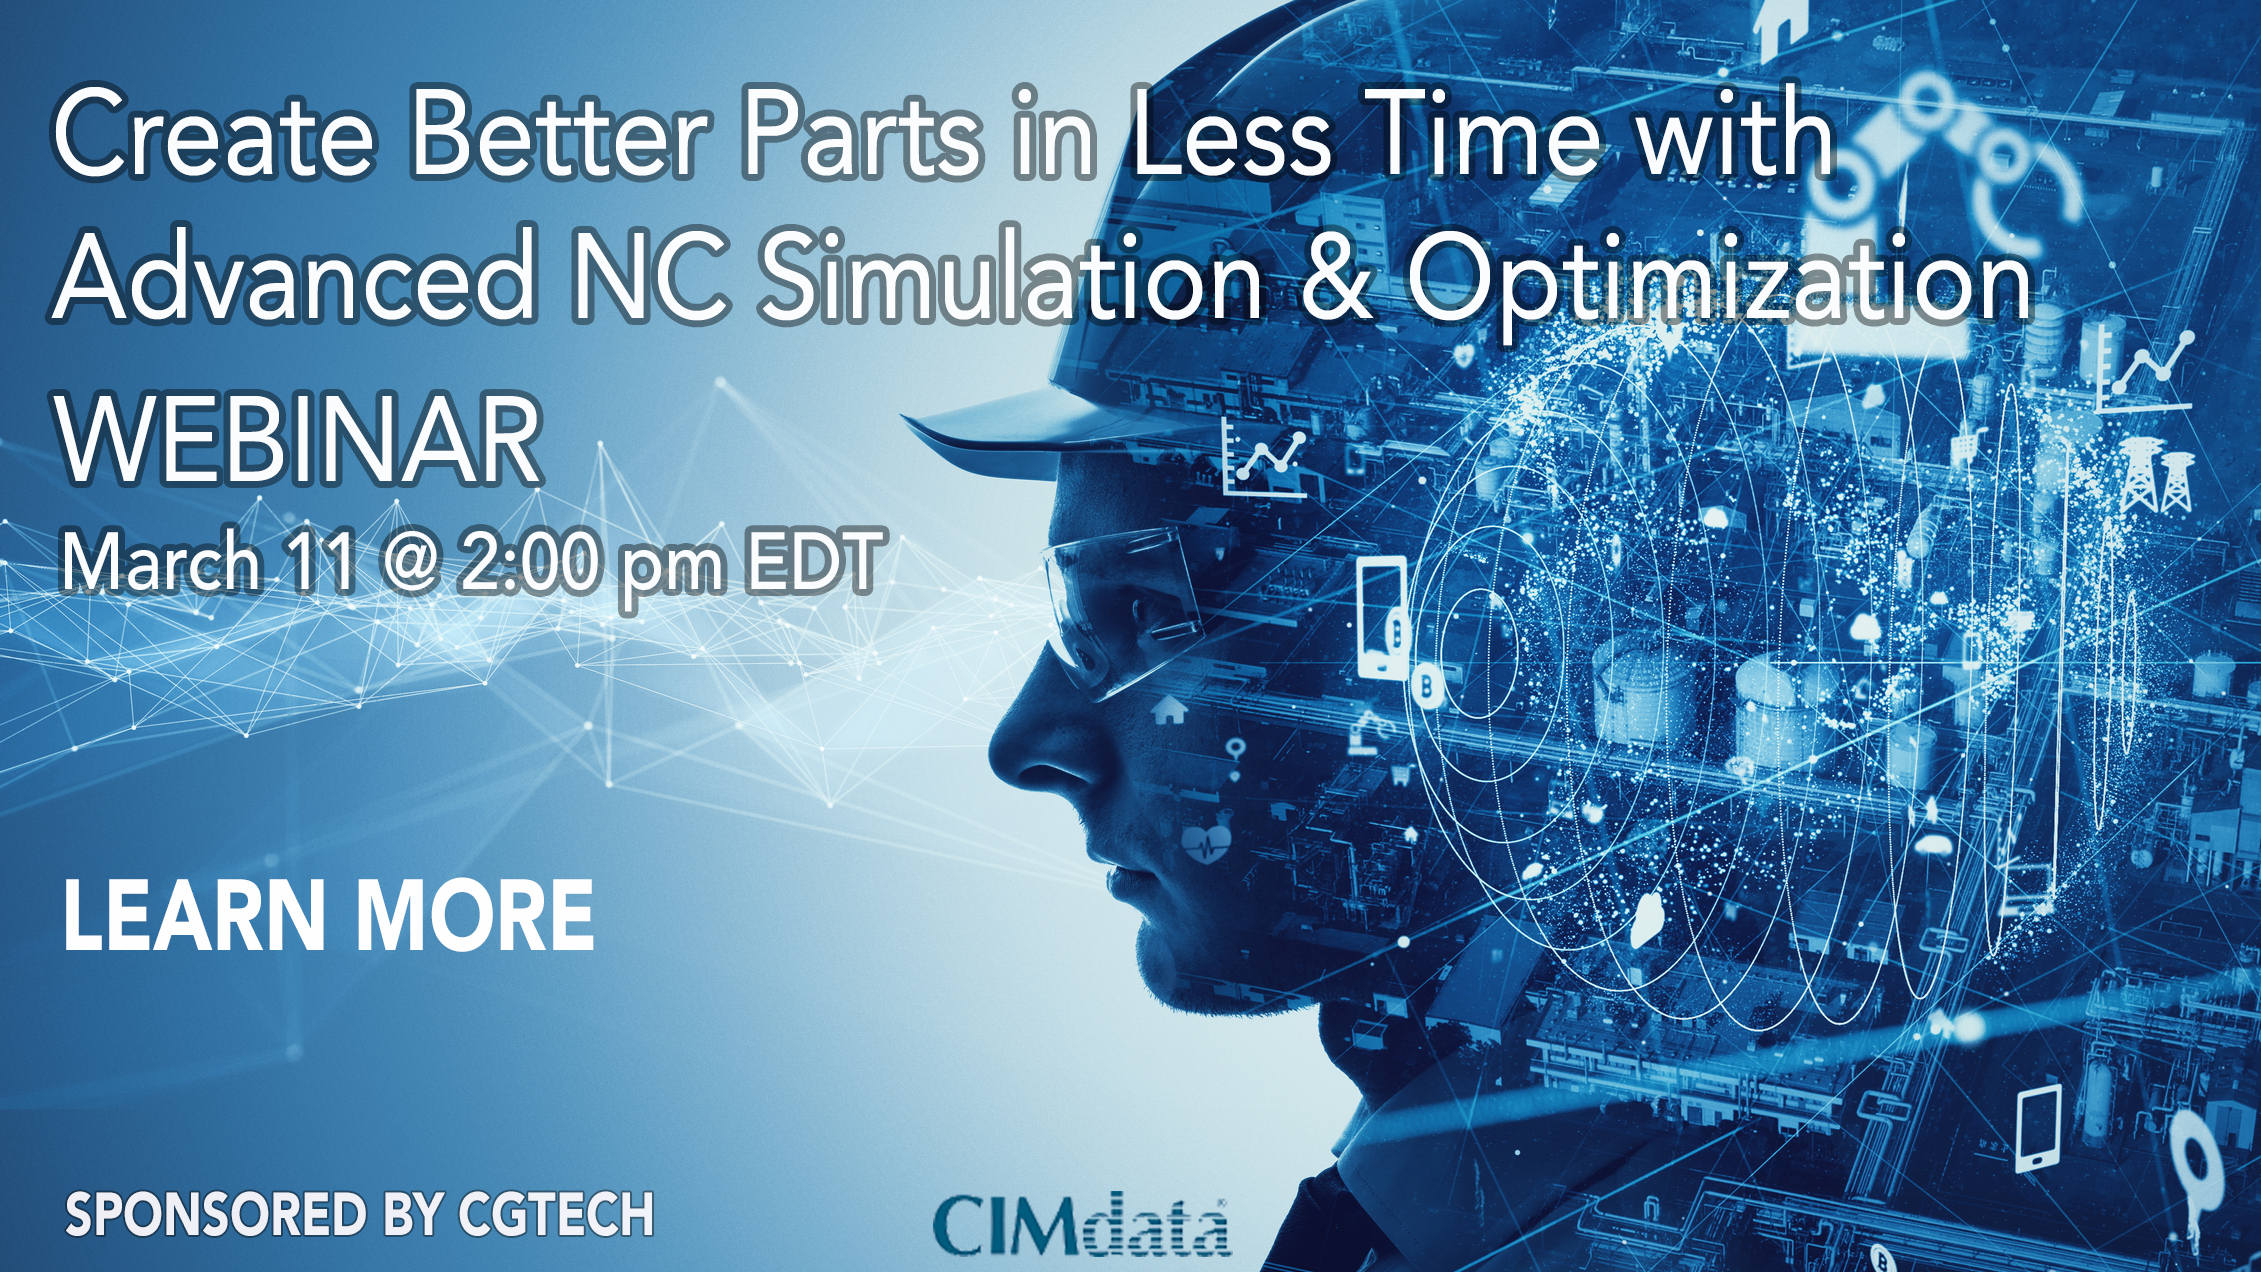 CIMdata’s Mike Fry to Participate in an upcoming Webinar